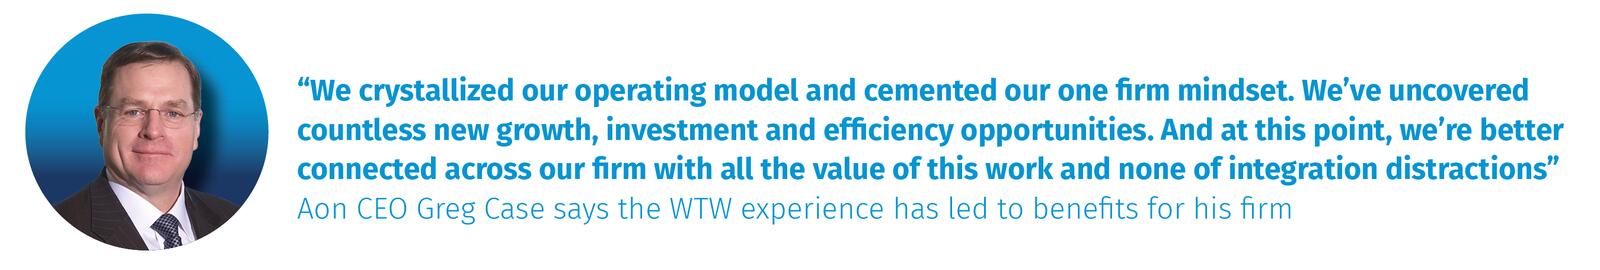 Aon CEO Greg Case says the WTW experience has led to benefits for his firm